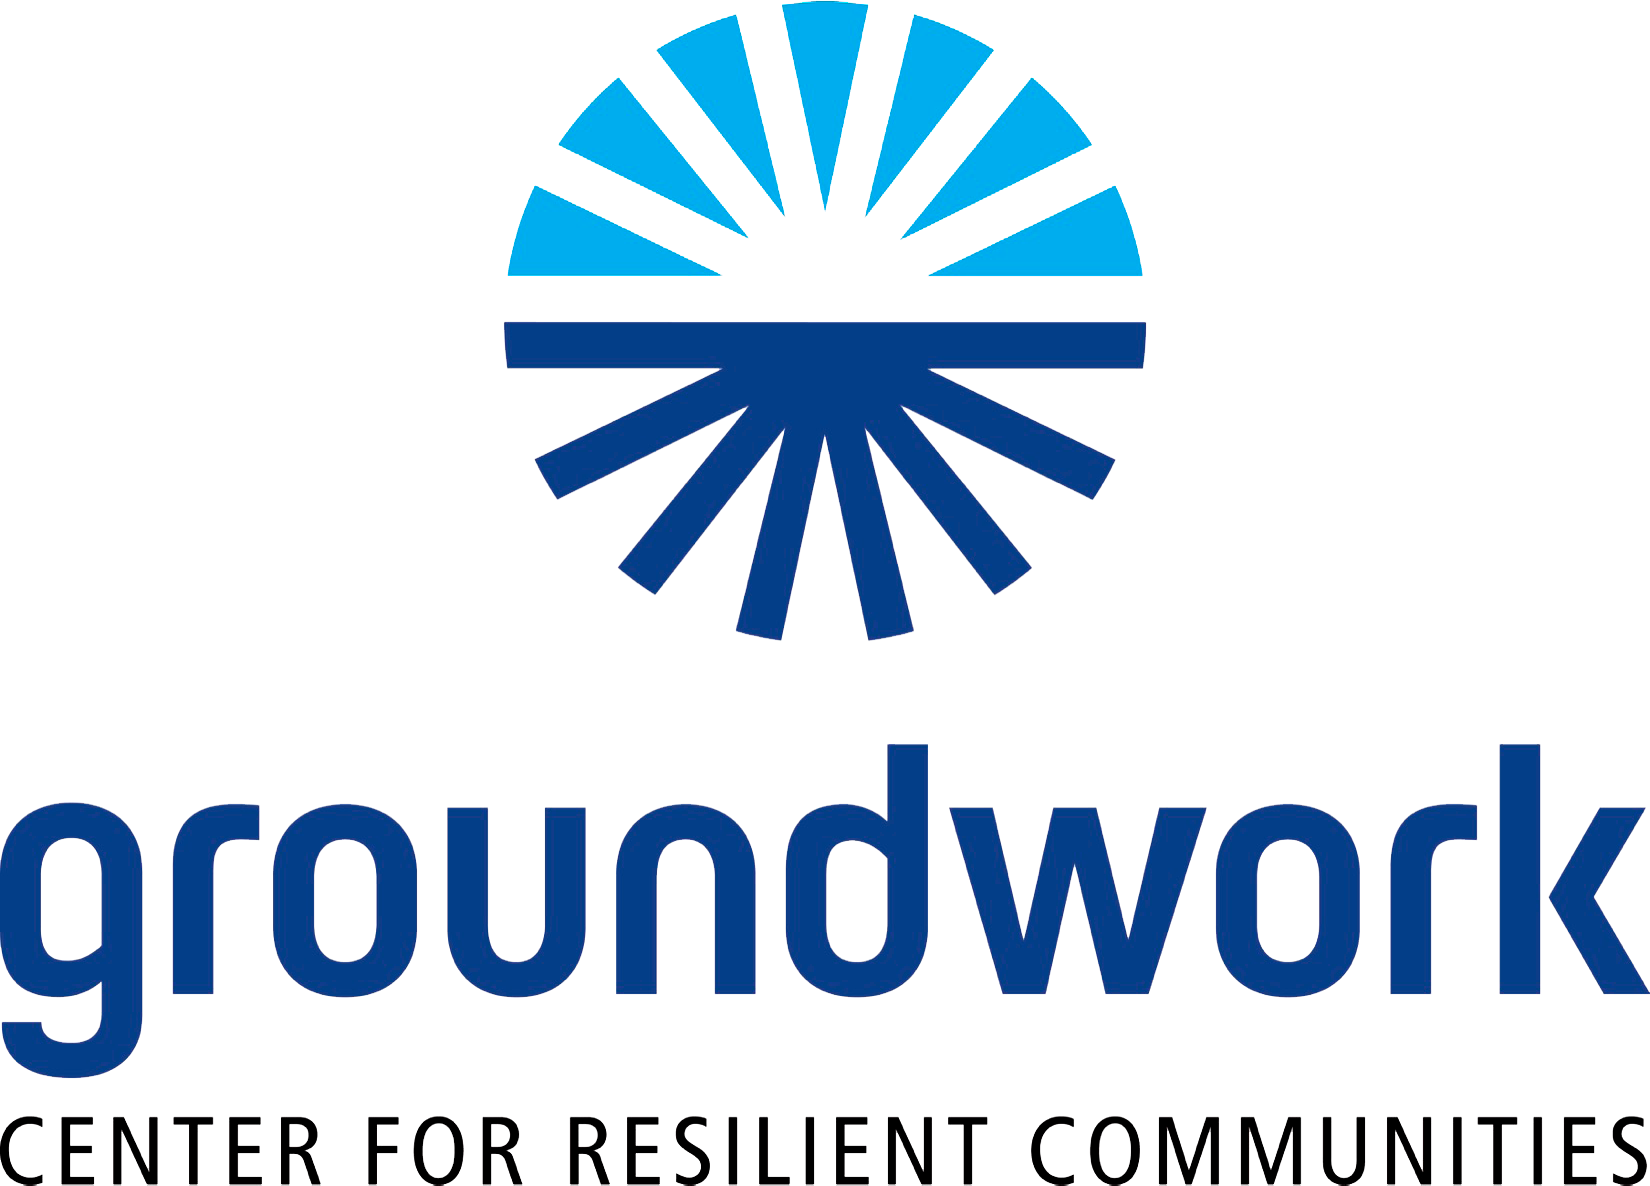 Groundwork Center for Resilient Communities